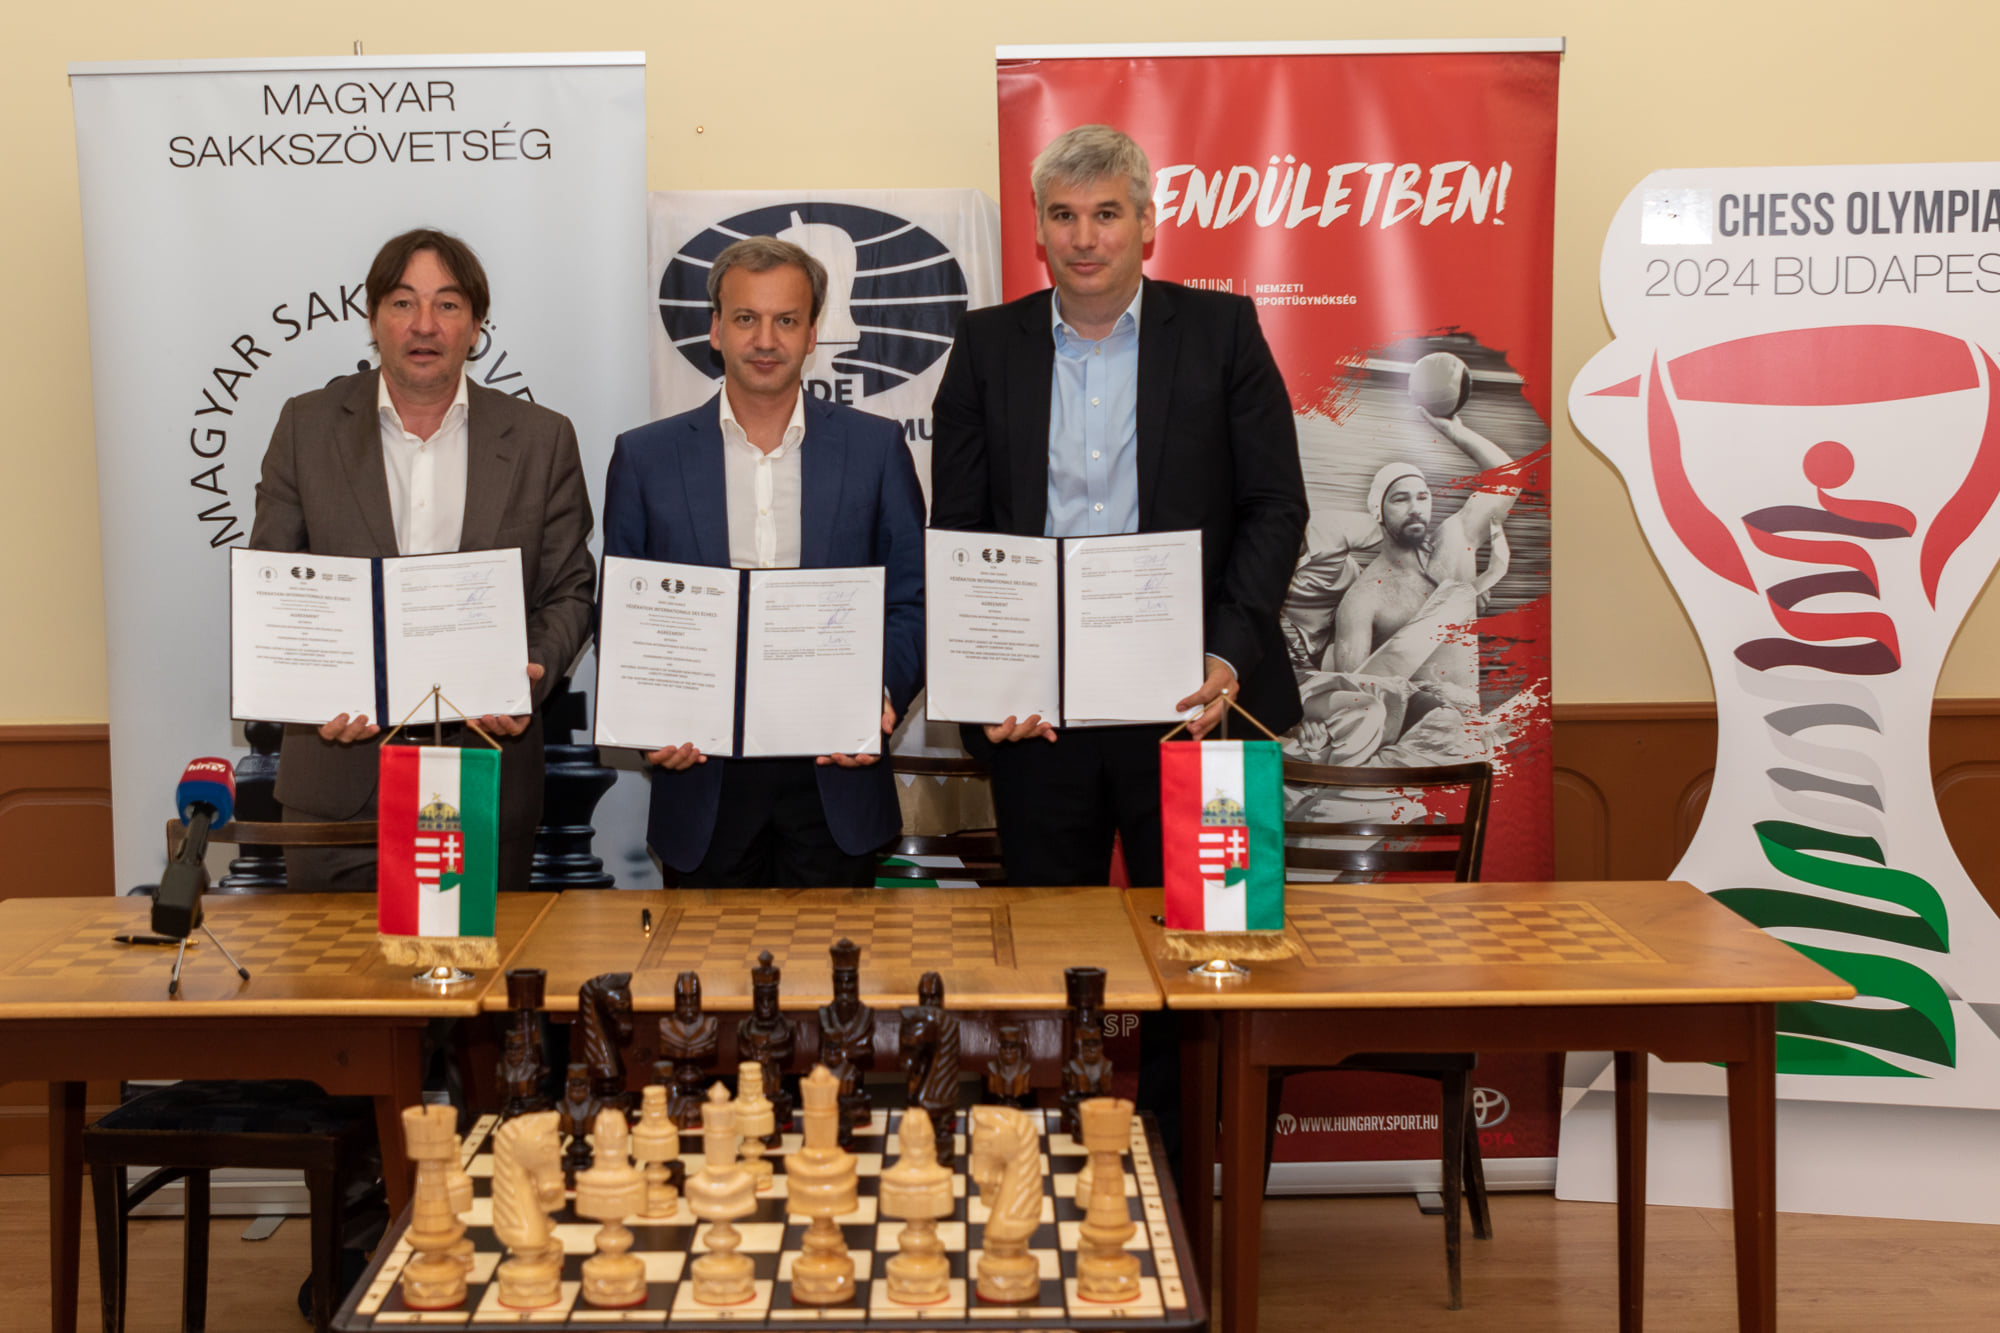 Budapest approved as host of 2024 Chess Olympiad by FIDE